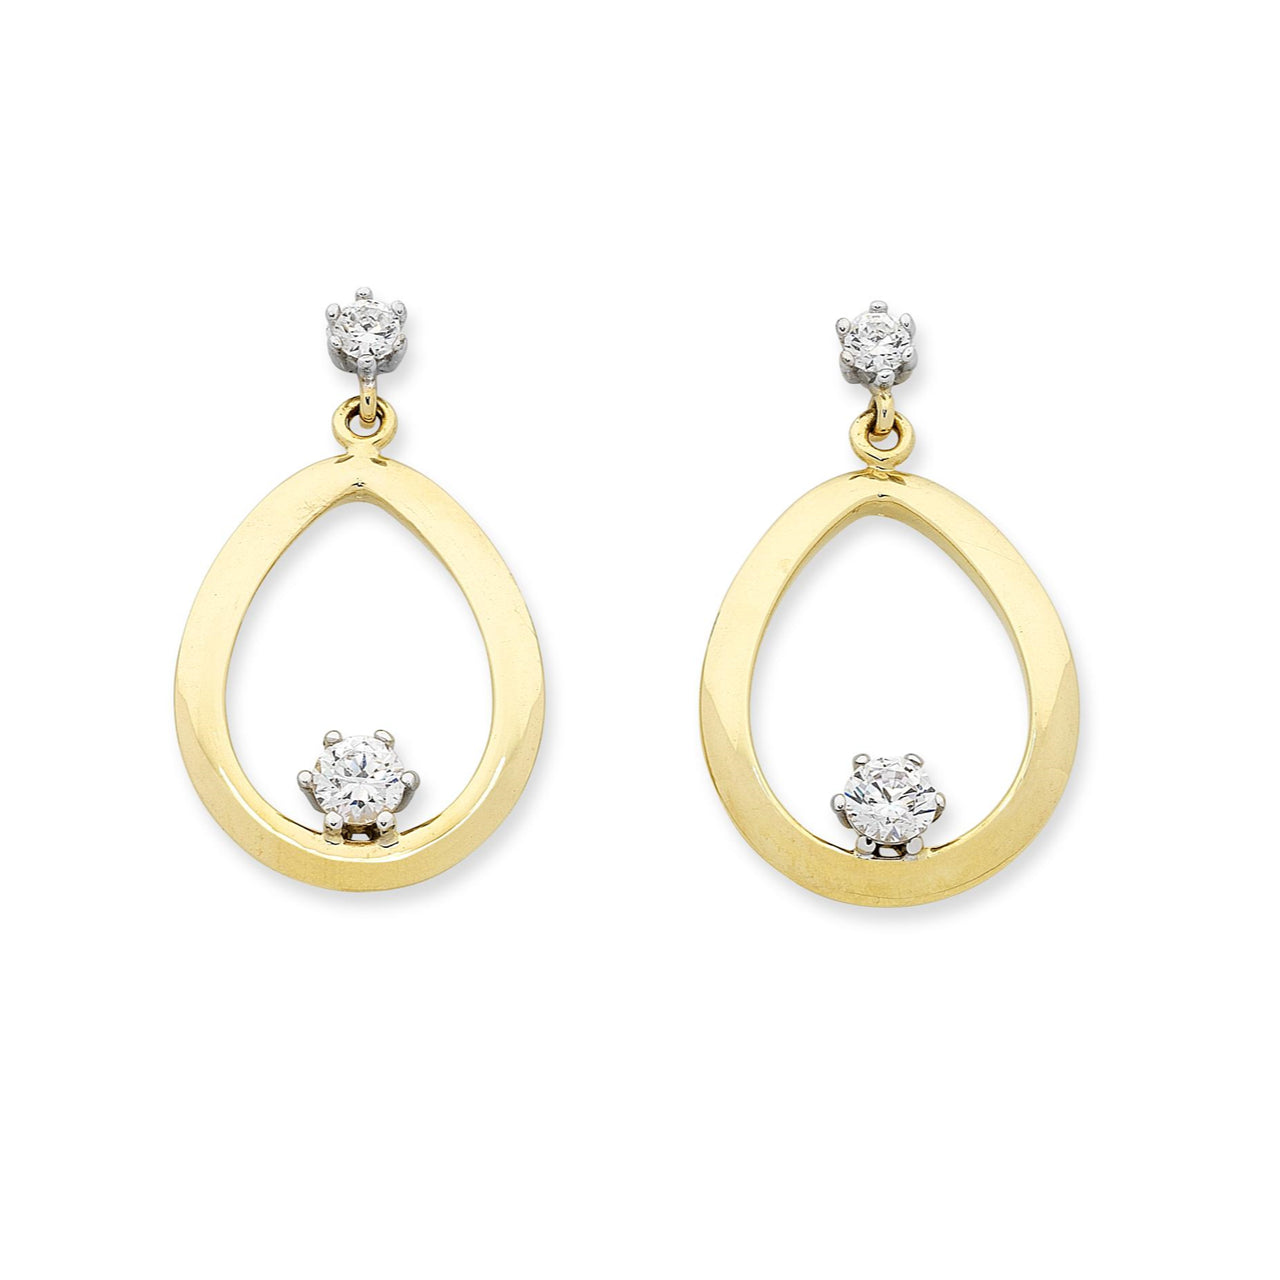 9Ct Yellow Gold / White Gold Cubic Zirconia Earrings